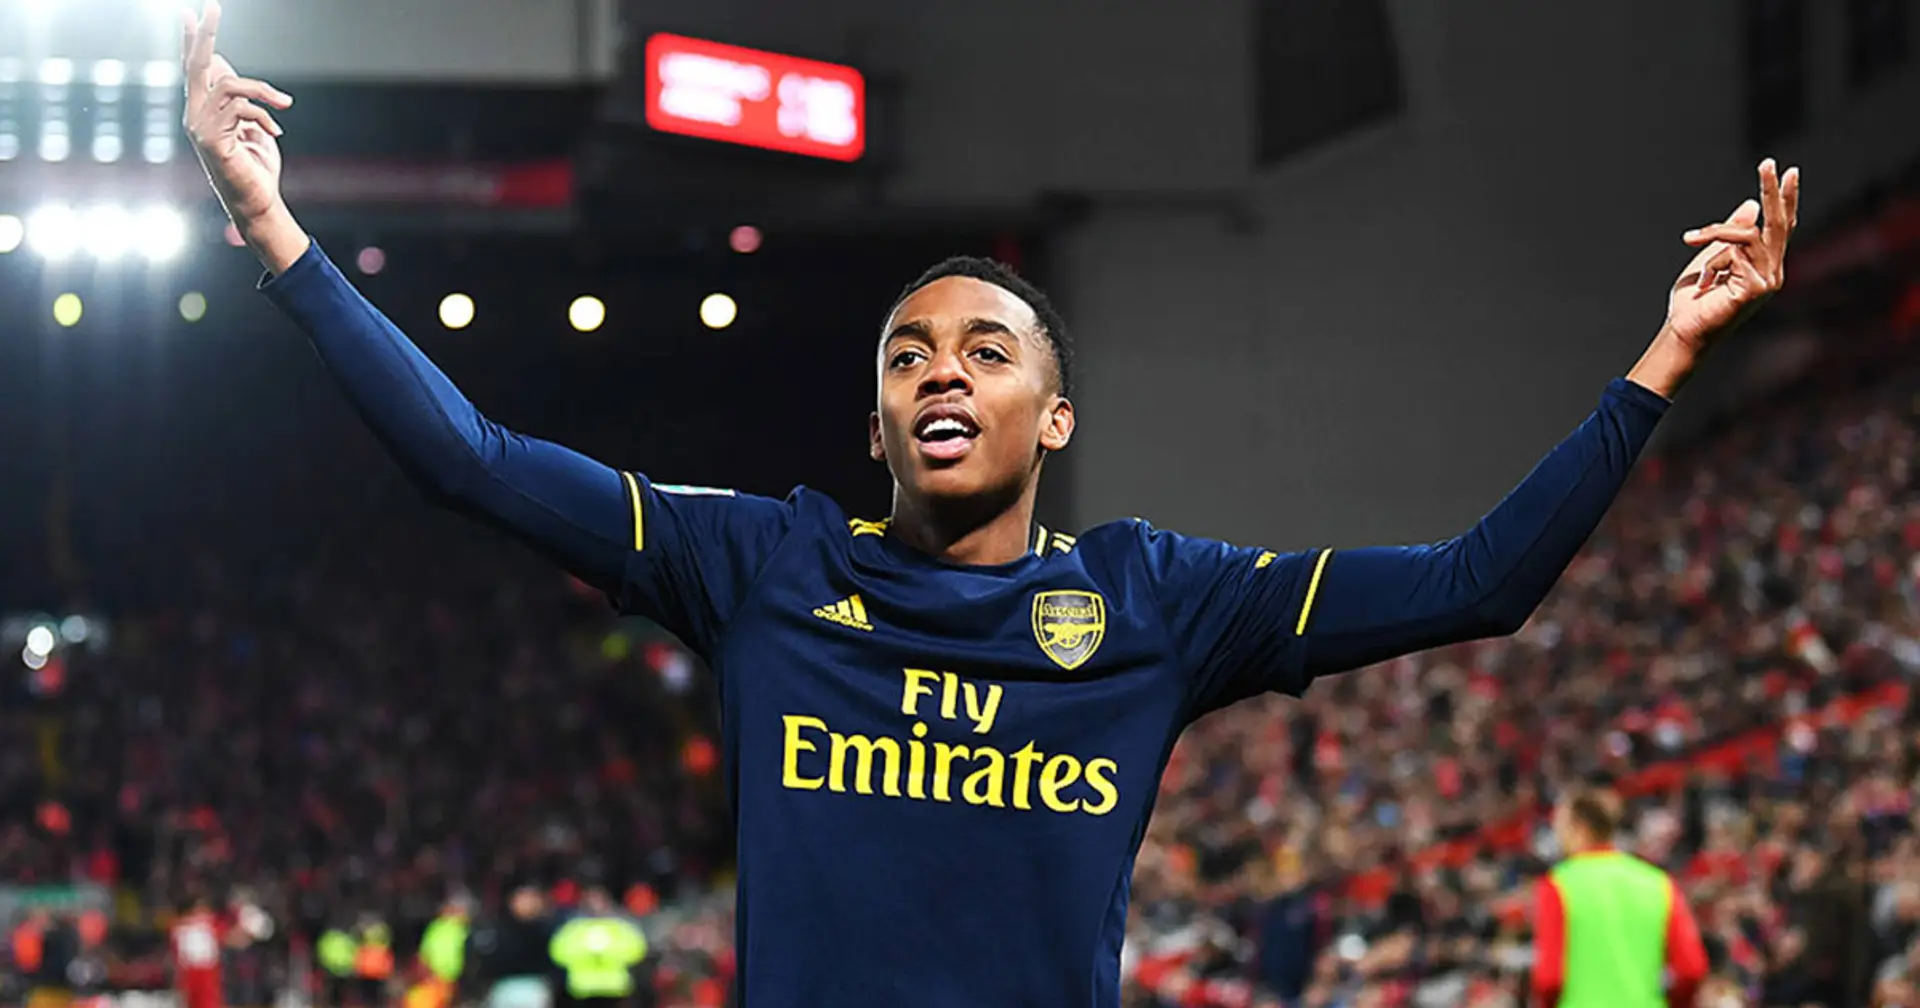 'I want to captain the side one day': Joe Willock reveals two of his biggest dreams